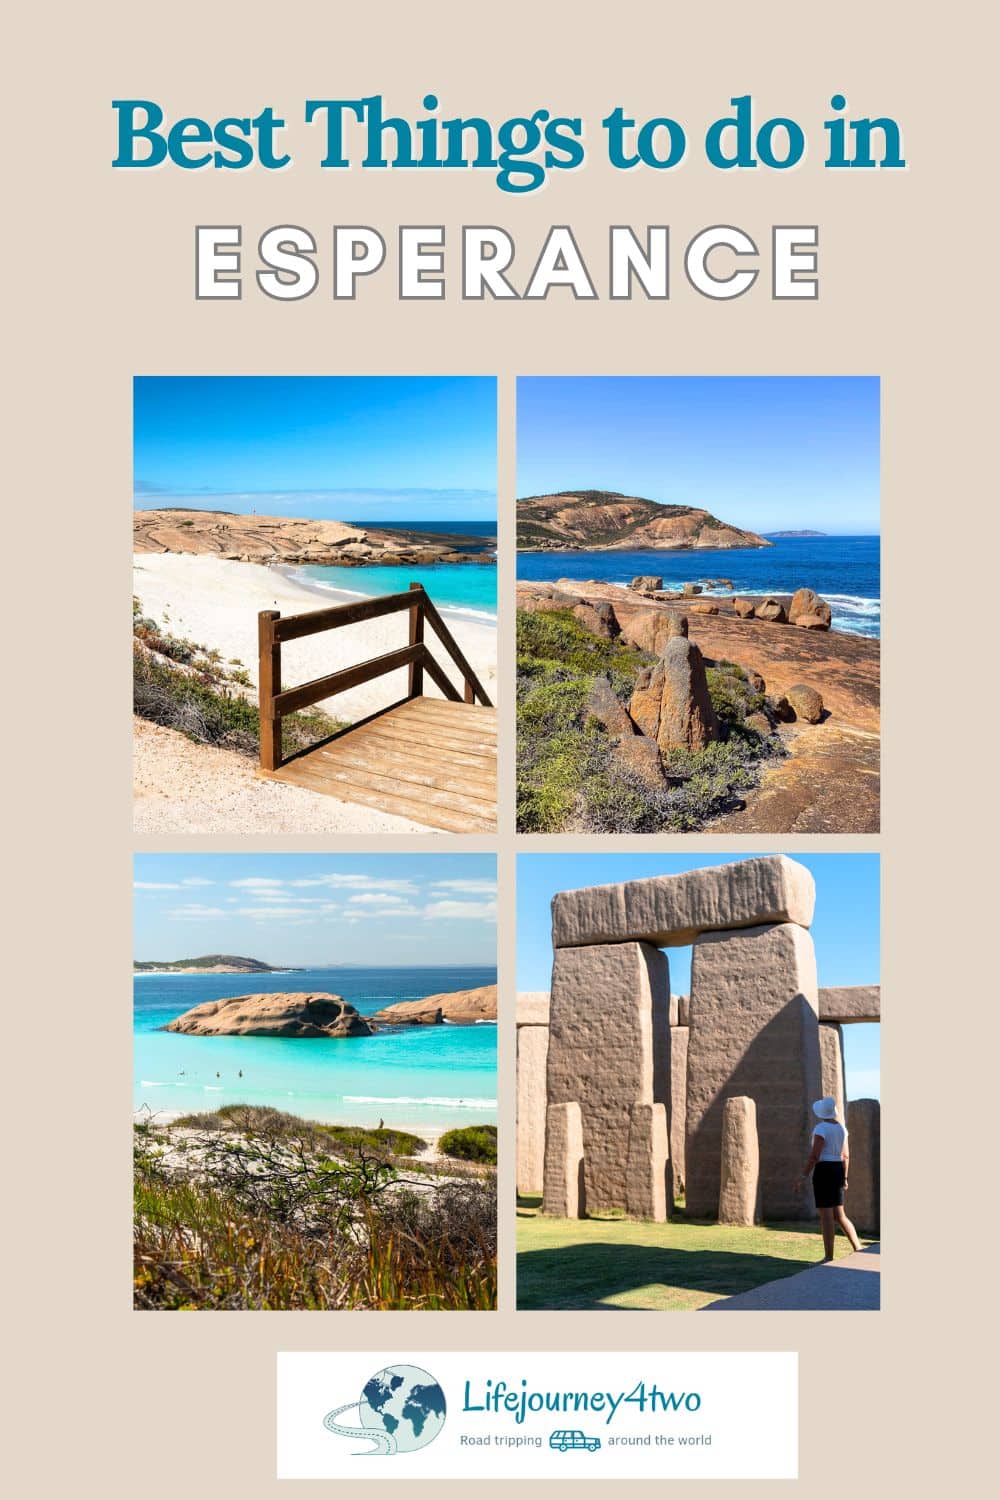 Things to do in Esperance Pinterest pin